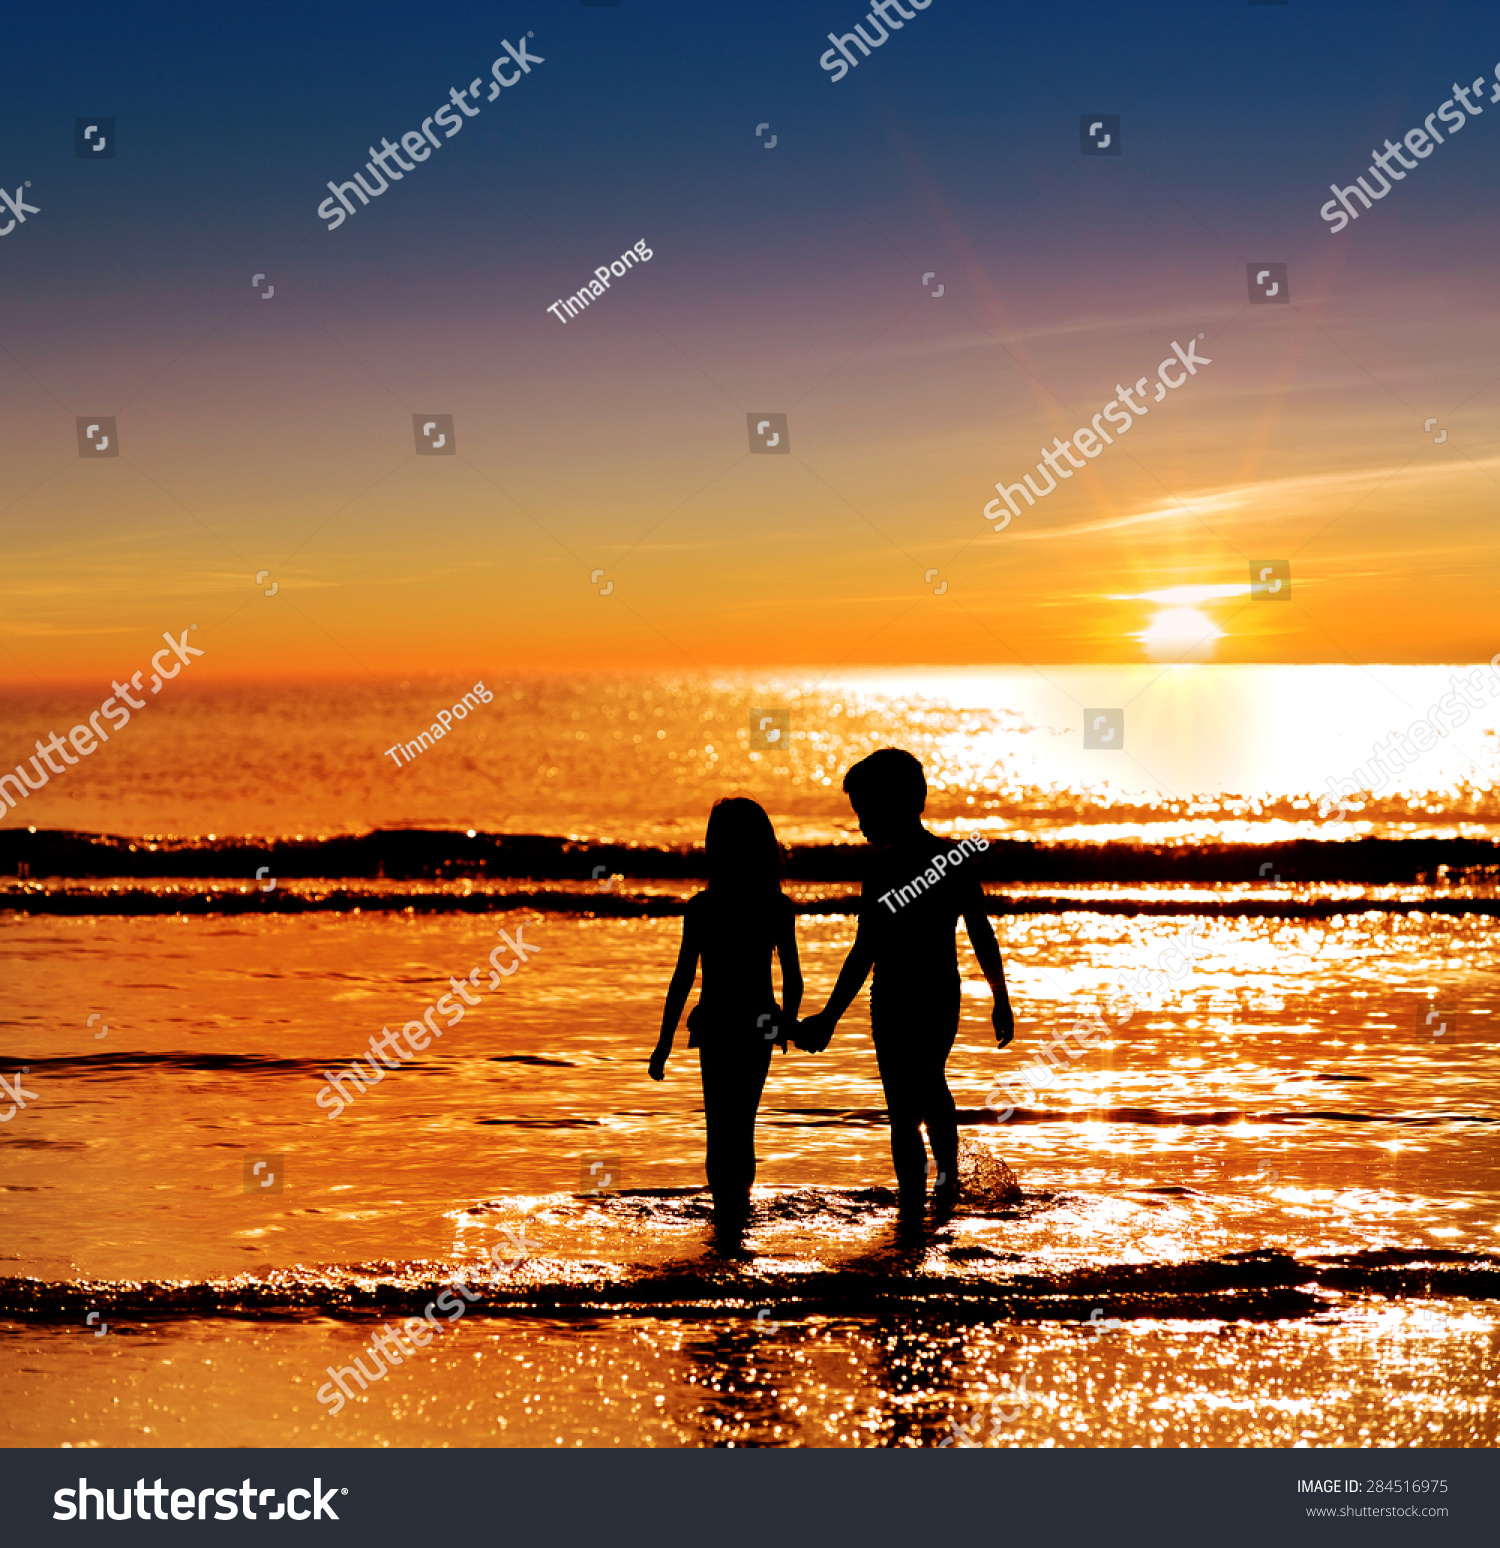 Silhouette boy holding  girl hand on the sea against the strong sunrise #284516975